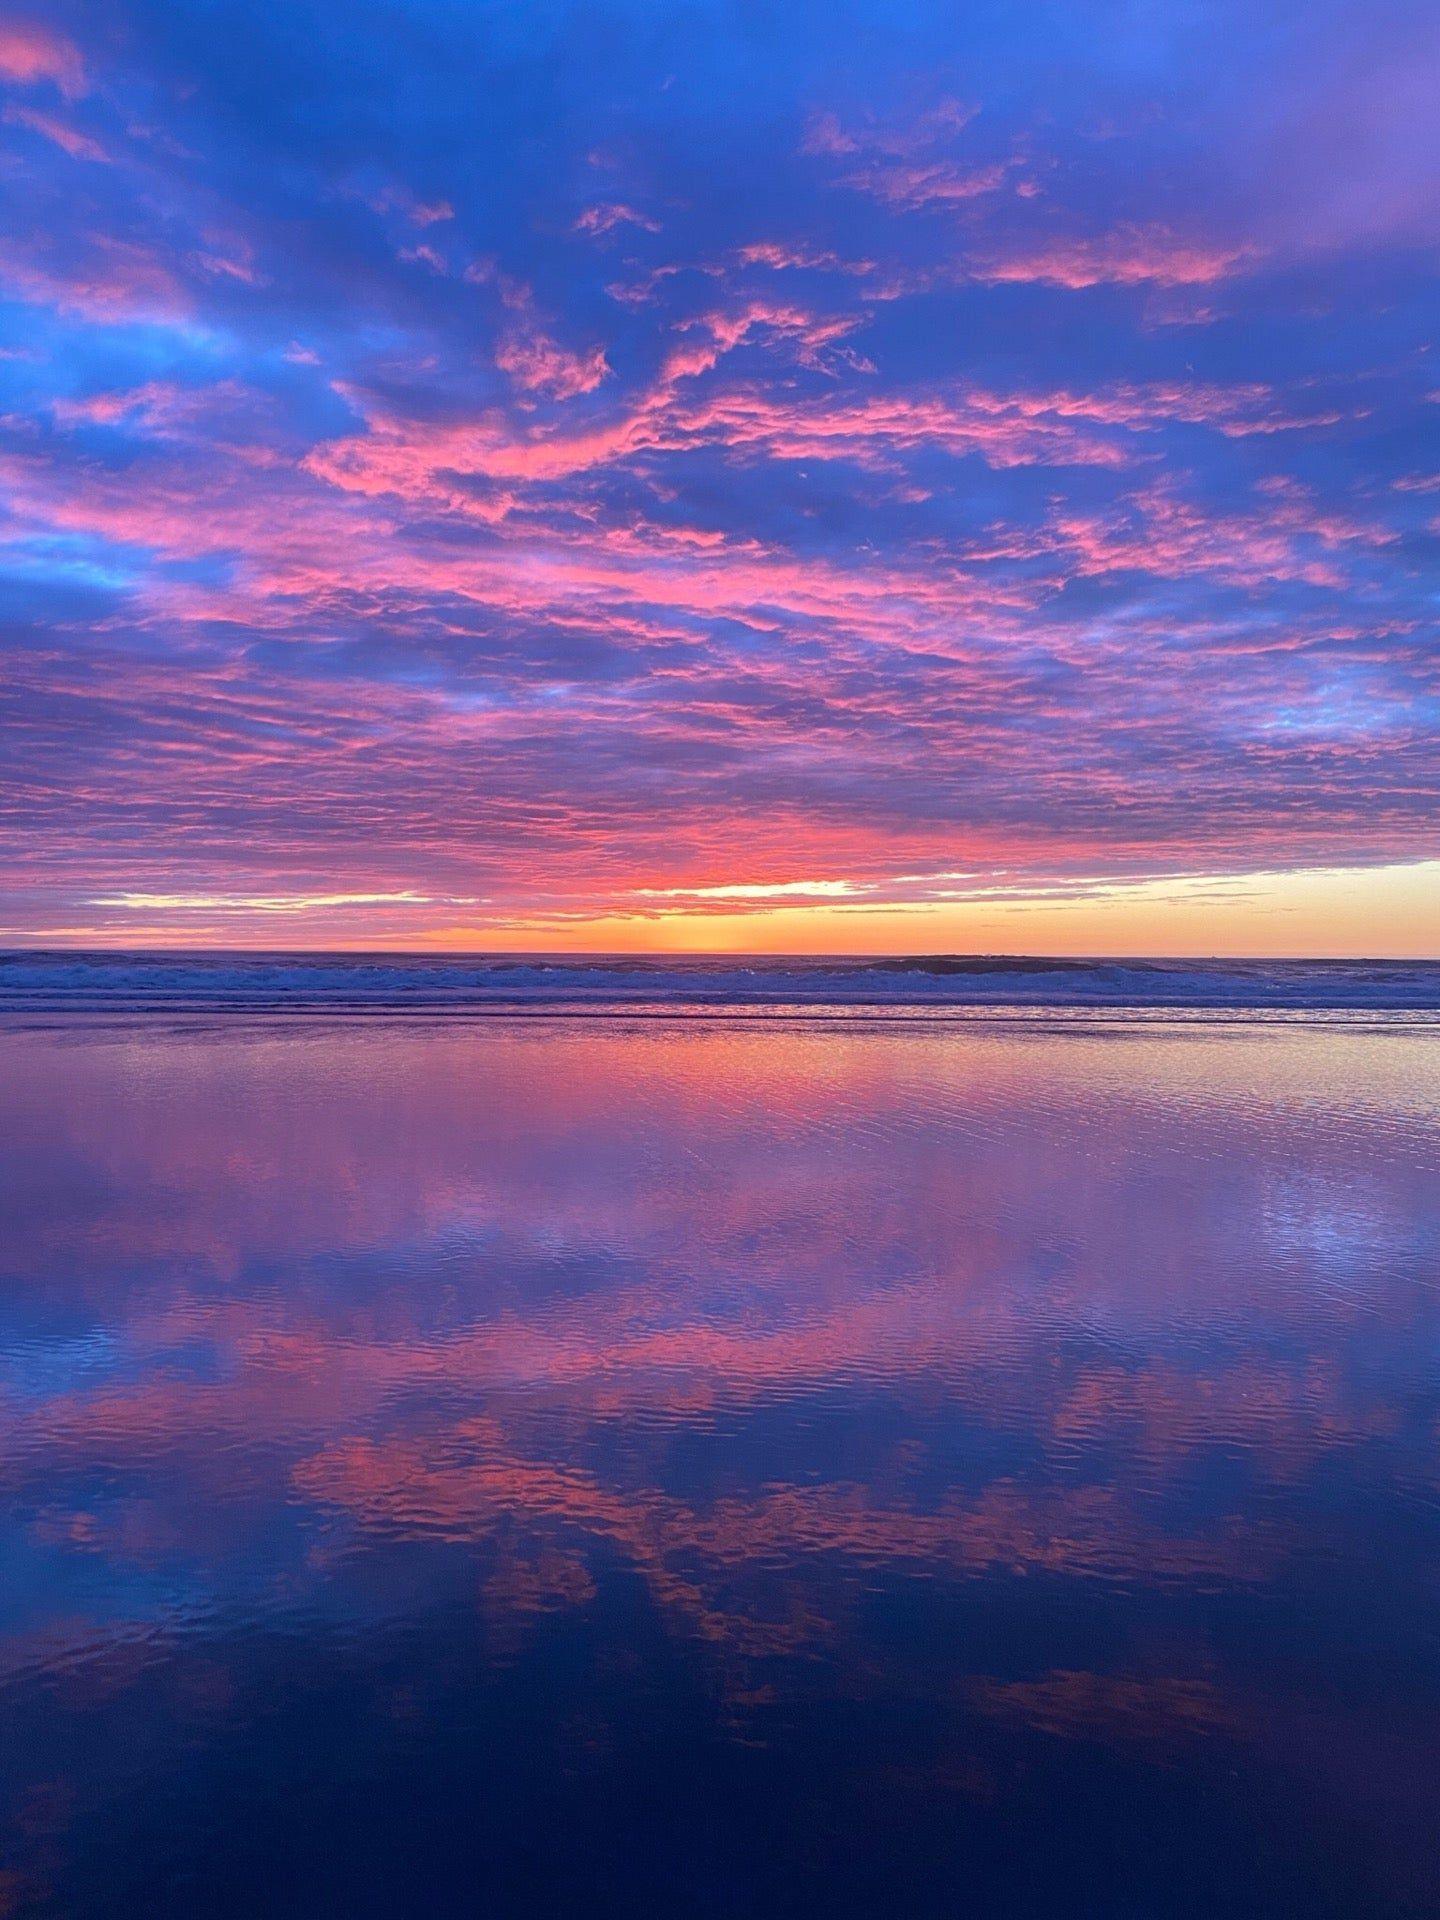 Blue and Purple Sunset Wallpapers - Top Free Blue and Purple Sunset ...